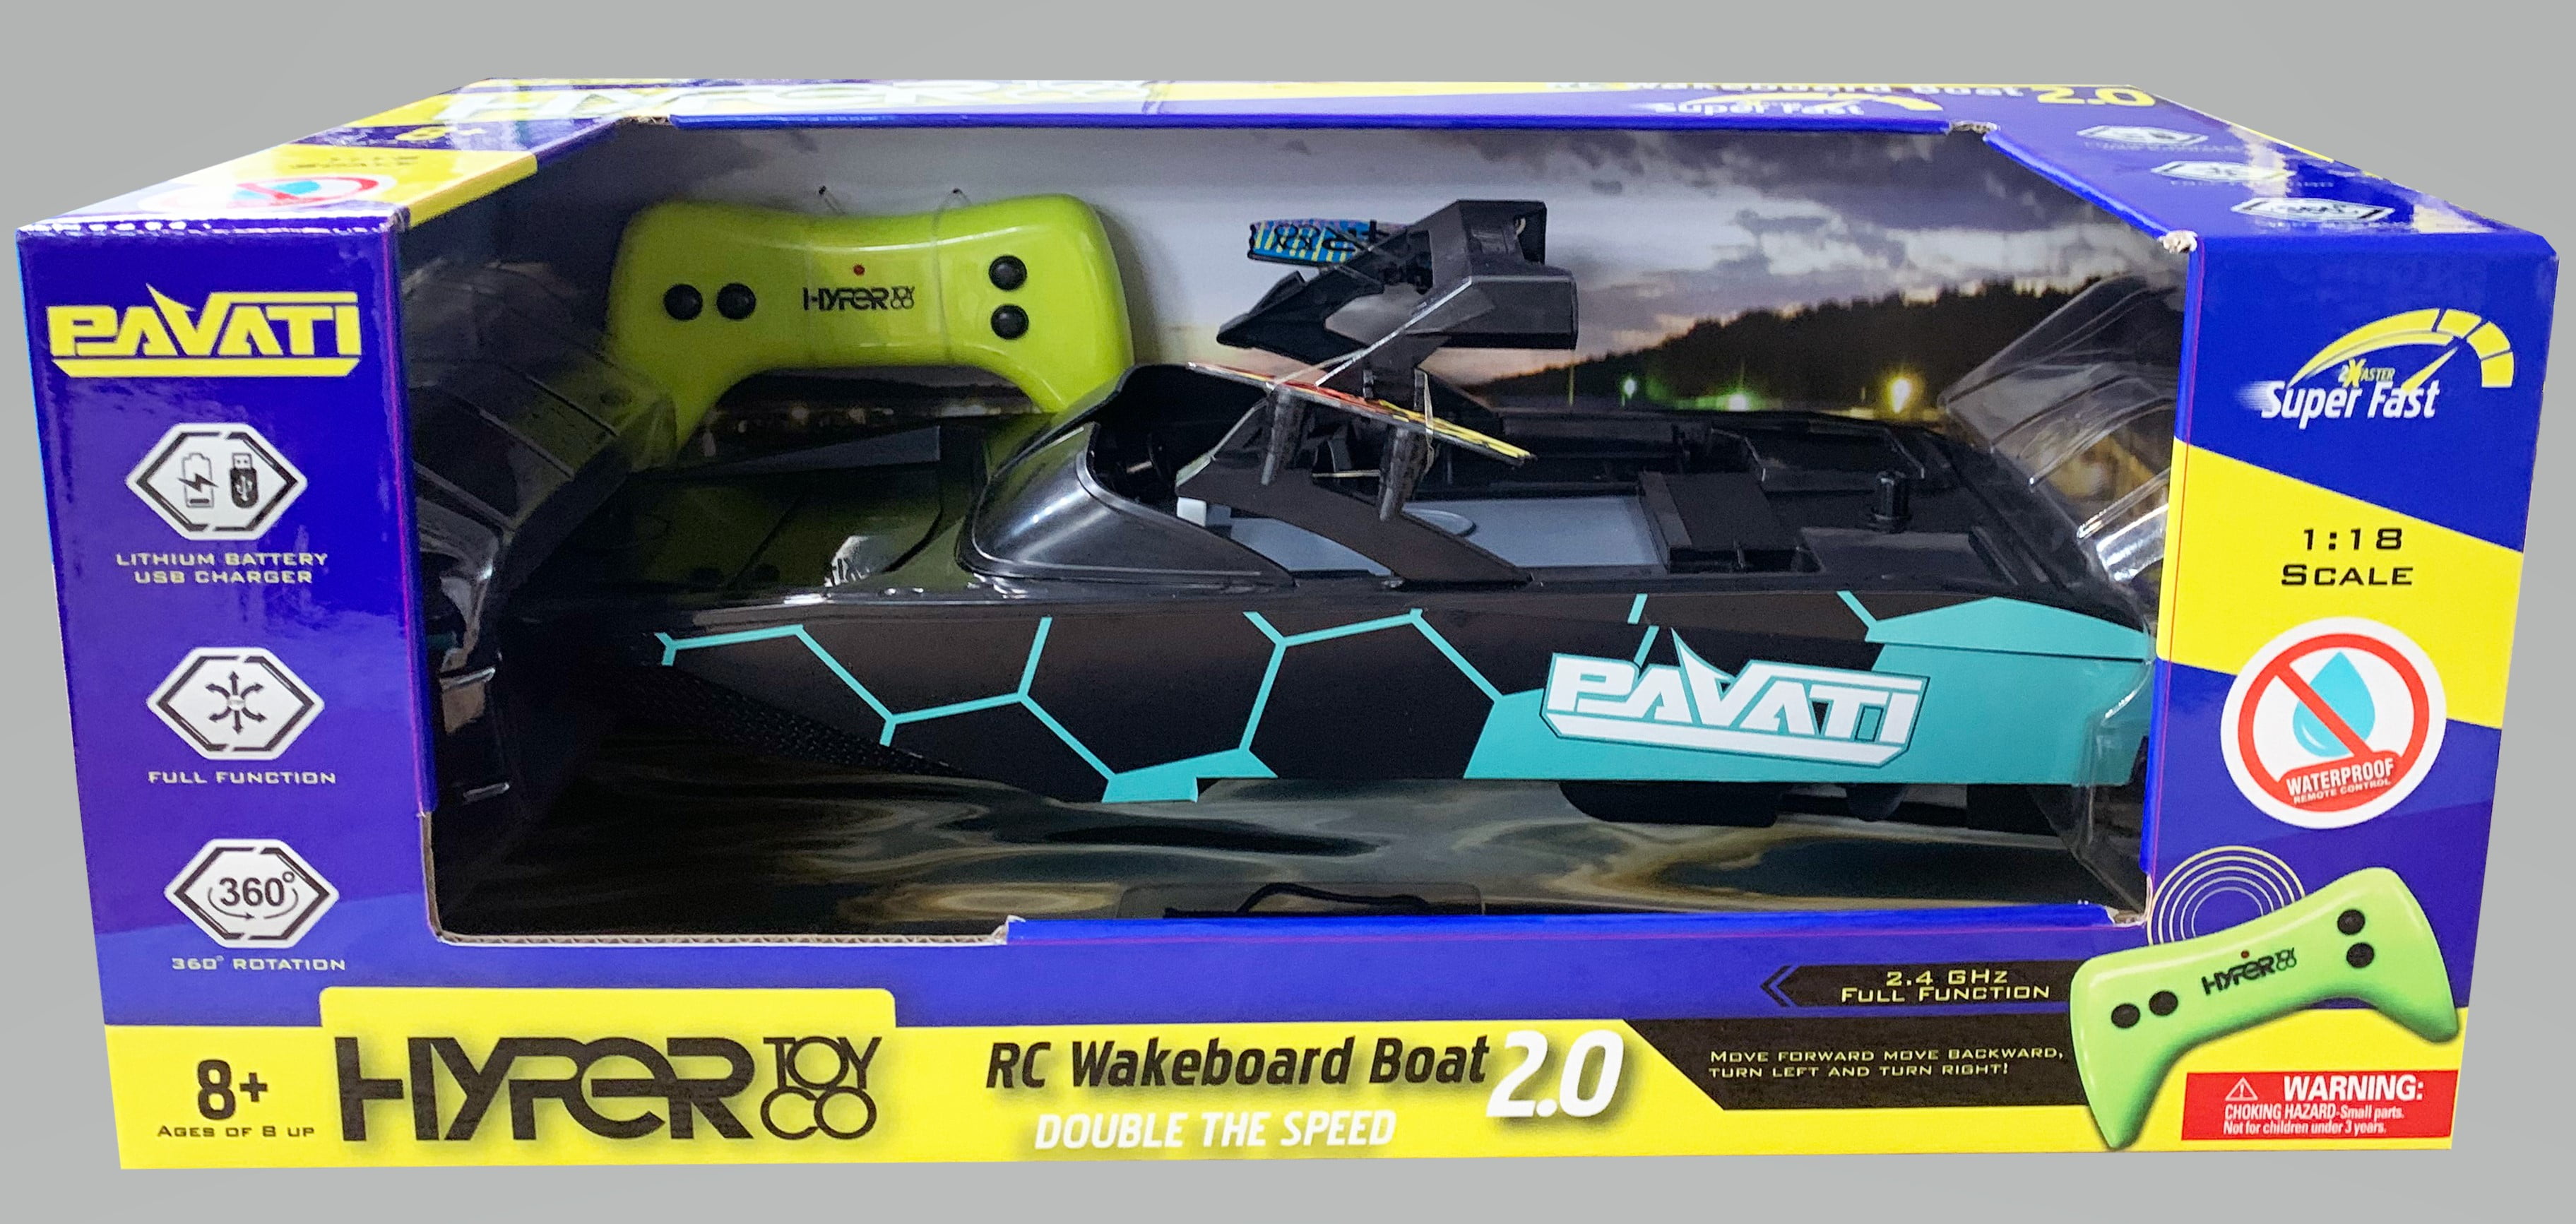 1:18 Electric Blue and Black Pavati 2.0 Remote Control Wakeboard Boat from Hyper Toy Company!